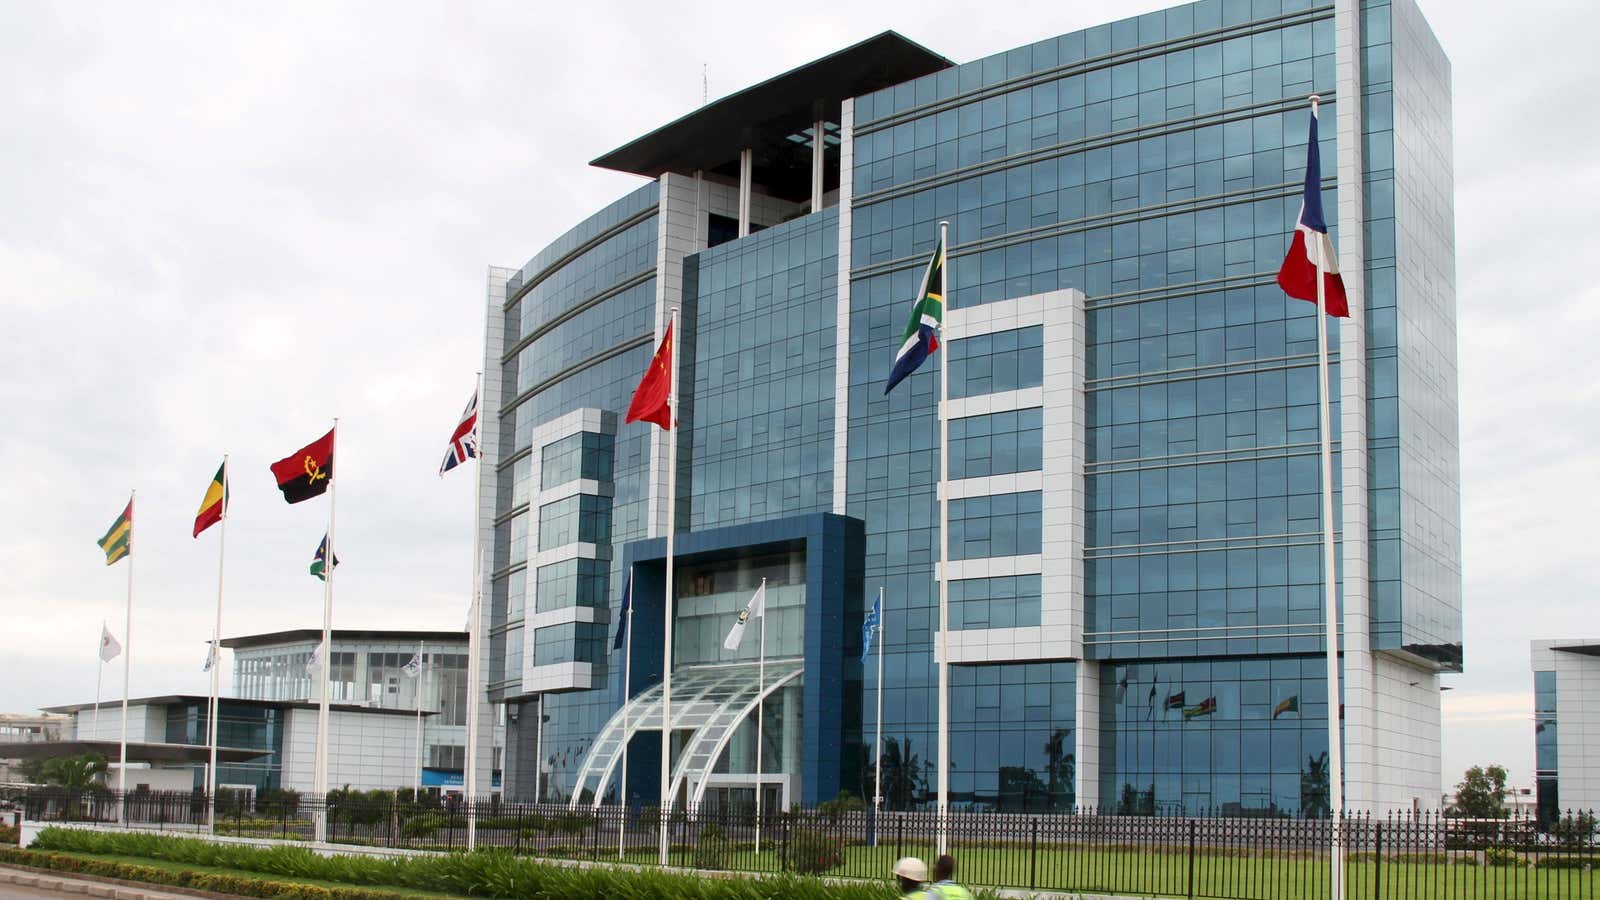 The Ecobank headquarters in Lome, Togo. It is 36 African countries